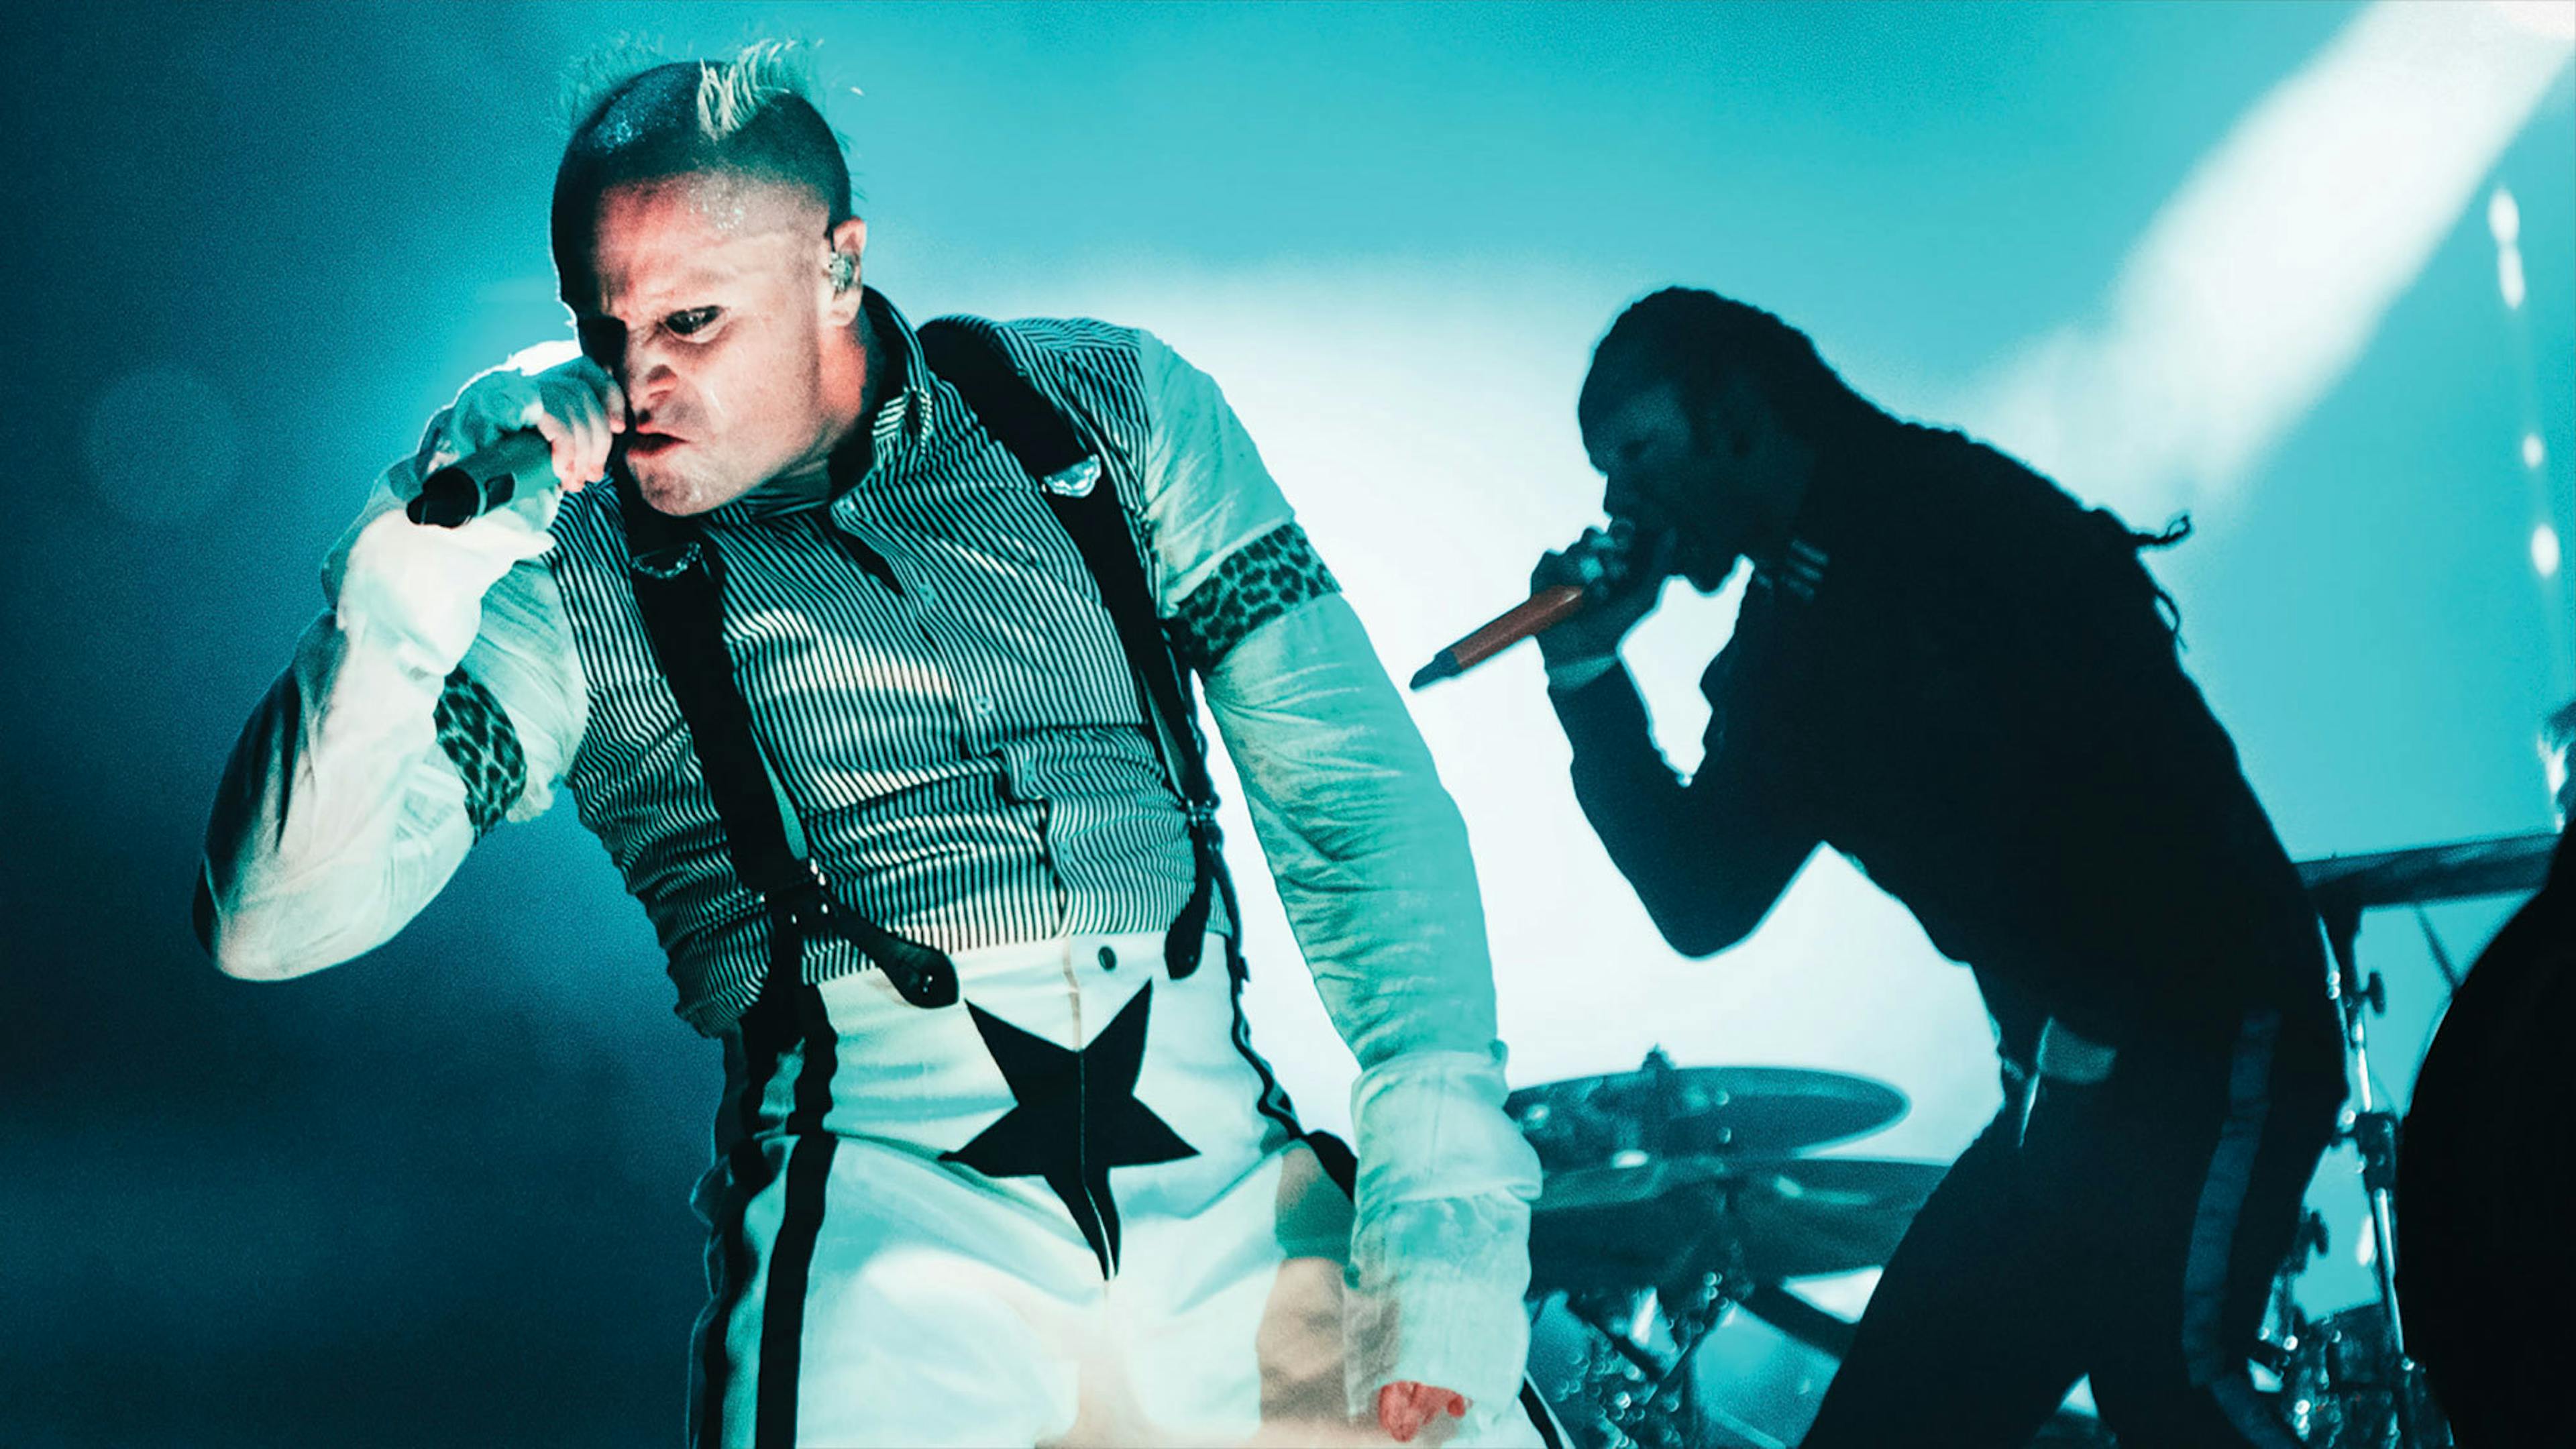 Download Festival's Andy Copping: How The Prodigy Bridged The Gap With Rock Fans